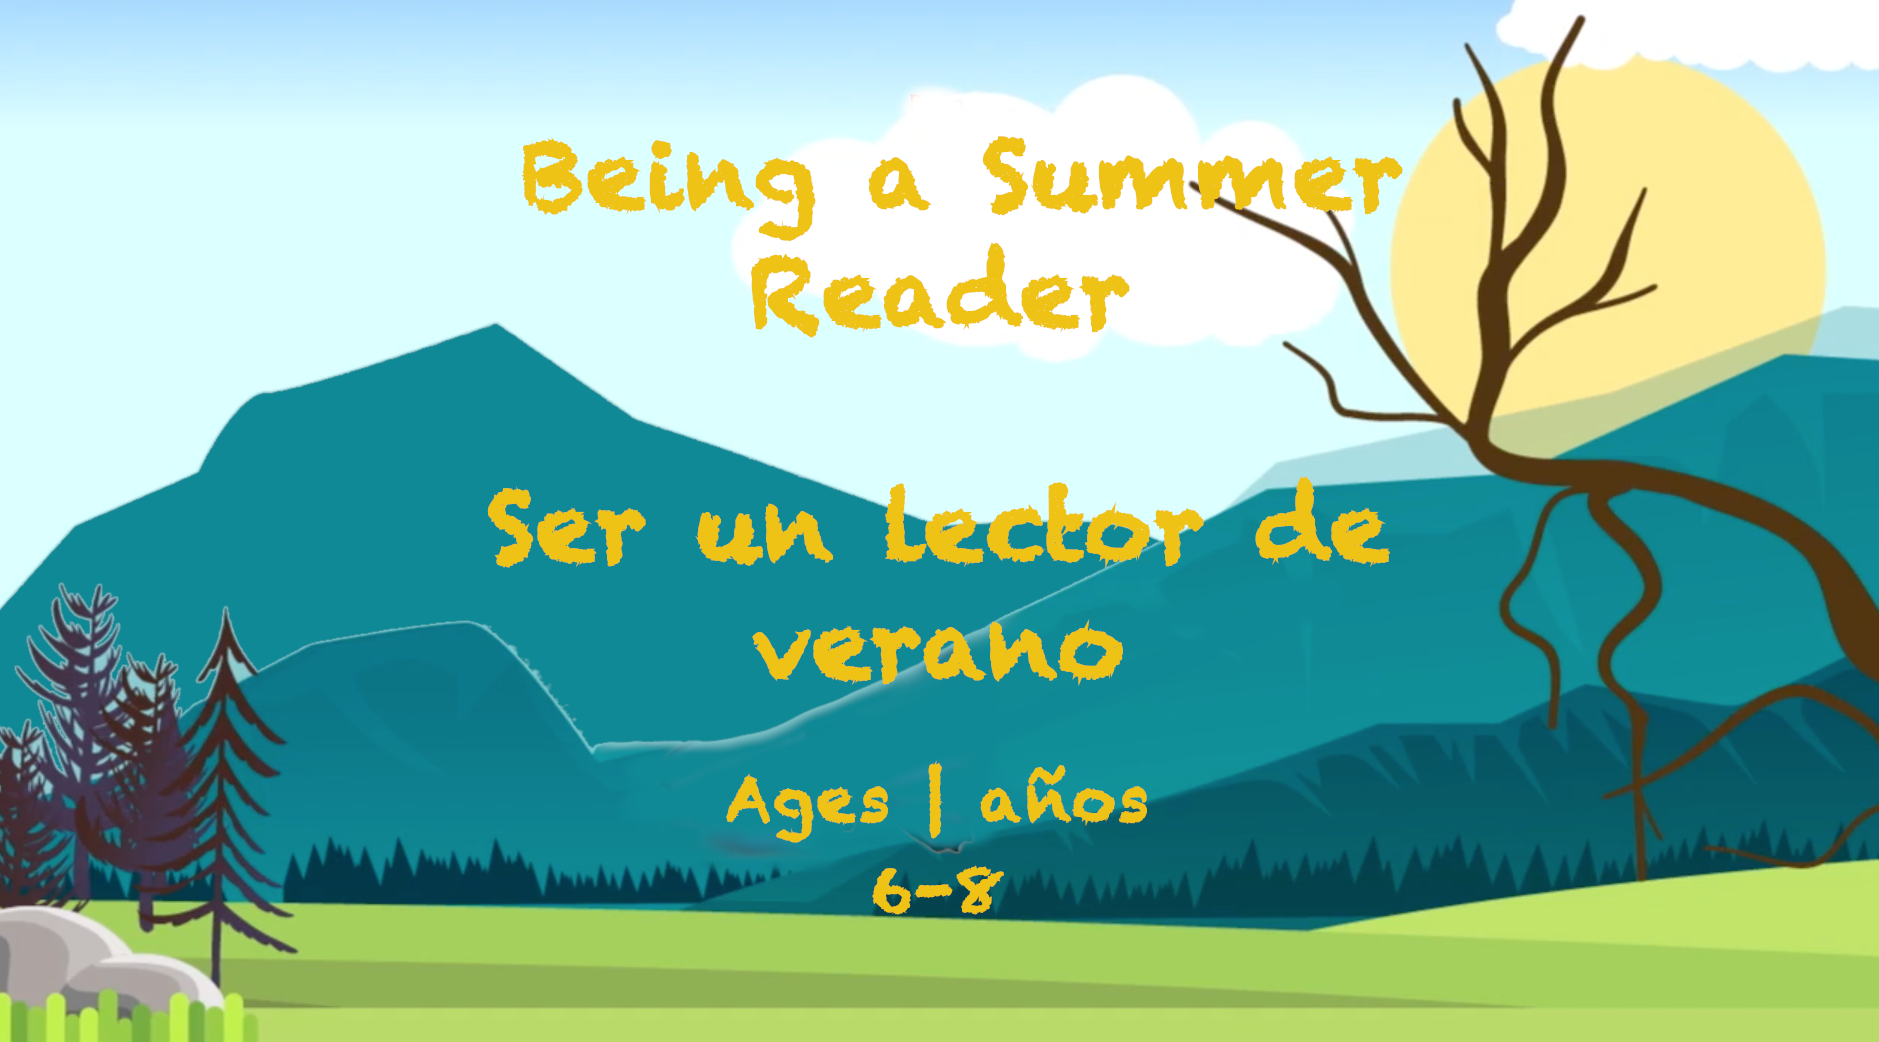 Being a Summer Reader for 6-8 year olds